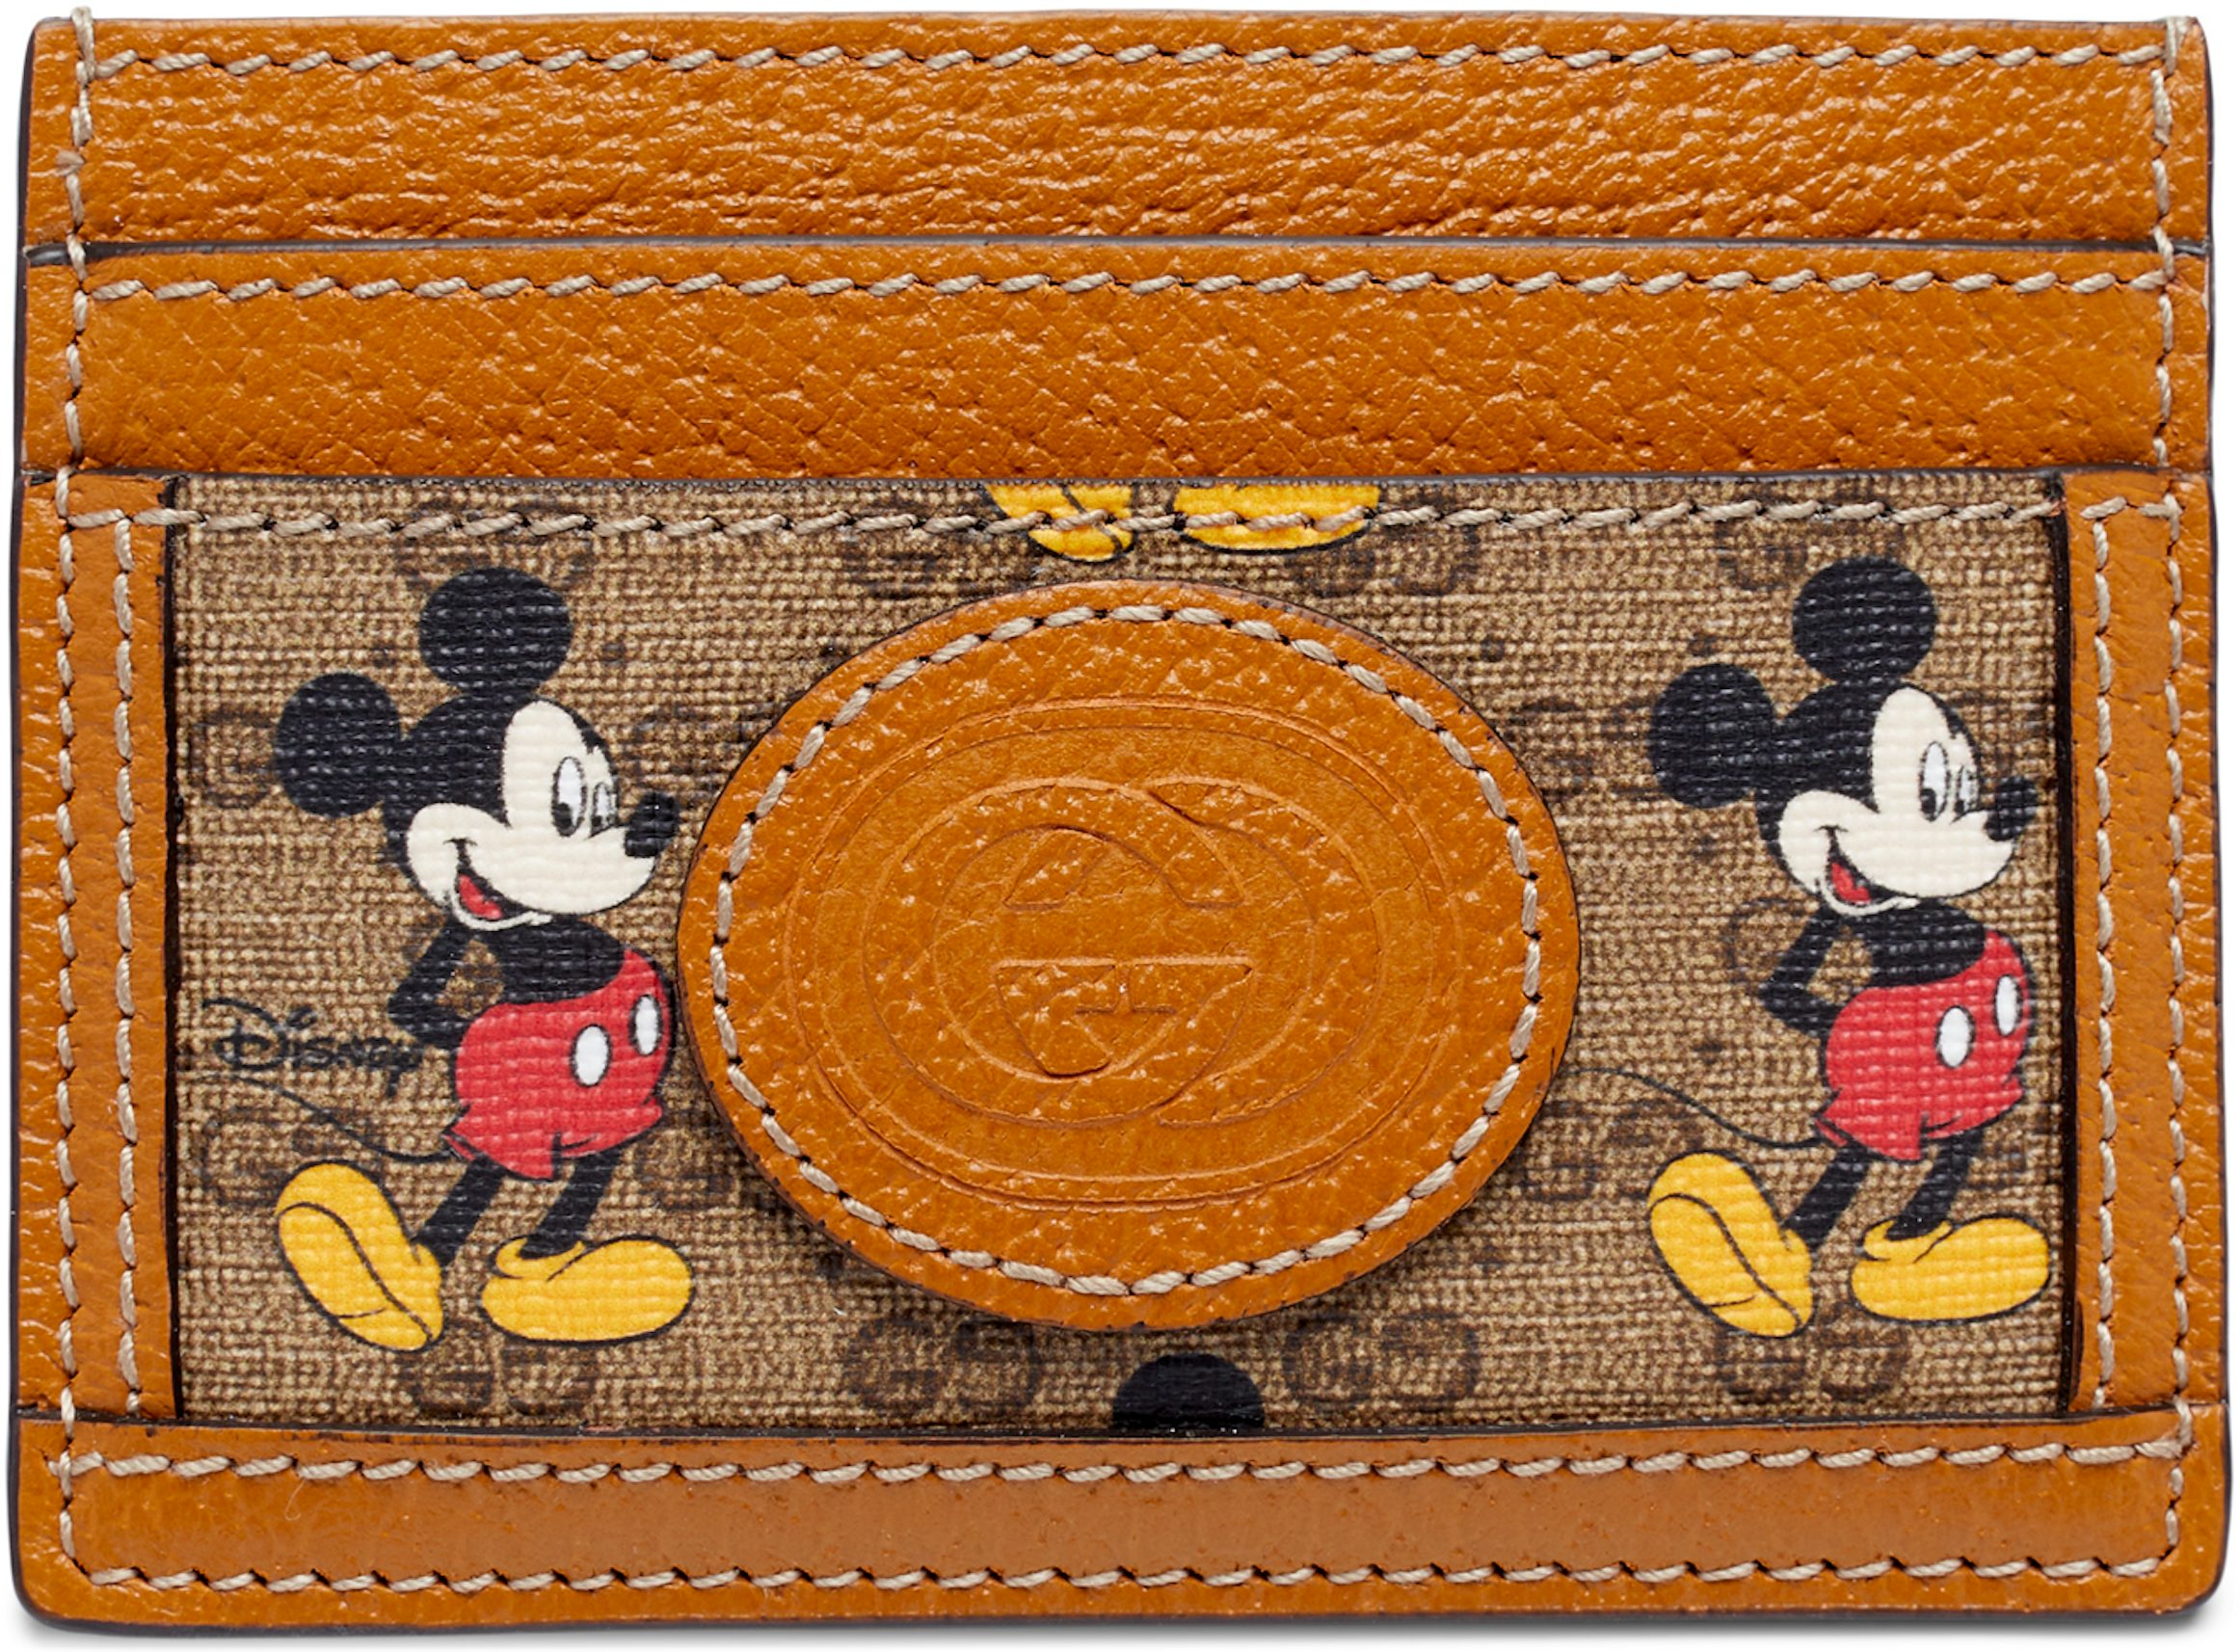 Gucci x Disney Card Case Mini GG Supreme Mickey Mouse Beige in Coated  Canvas/Leather - US